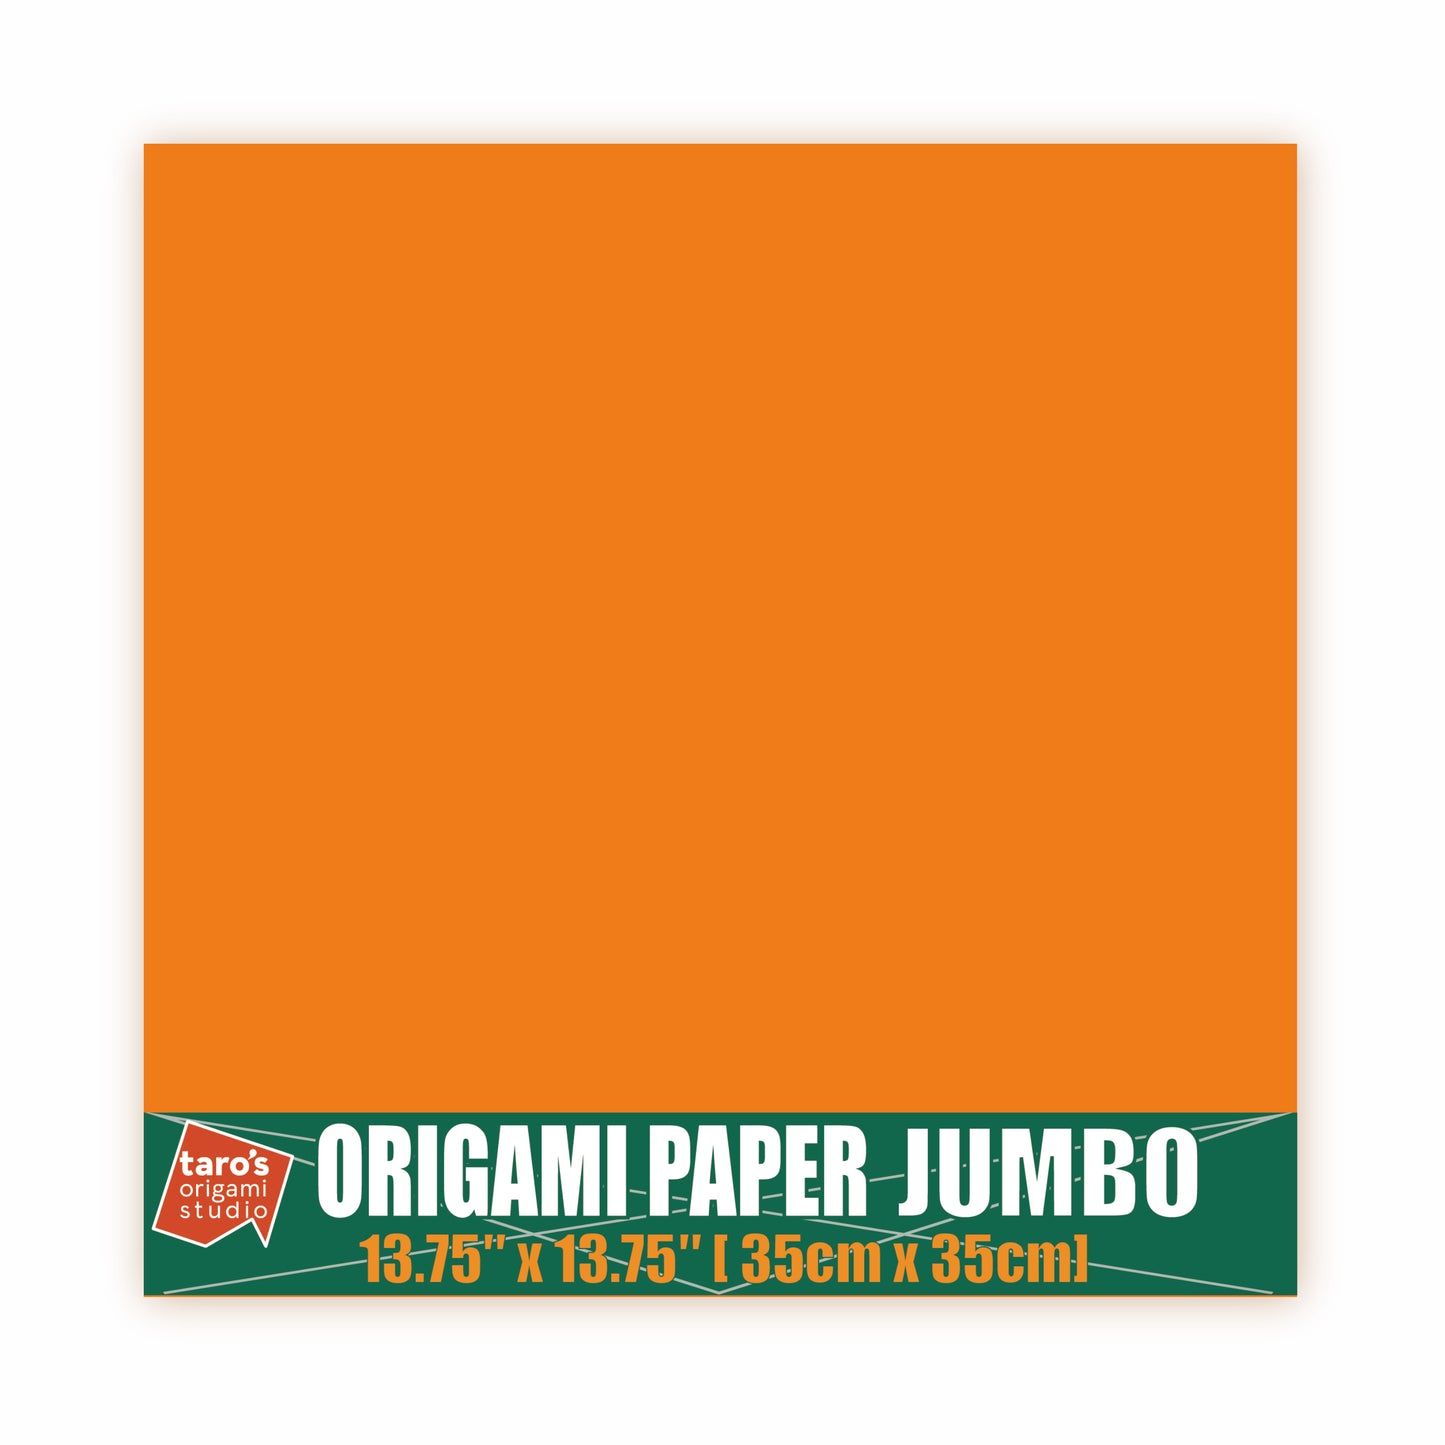 [Taro's Origami Studio] Jumbo 13.75 Inch / 35cm One Sided Single Color (Orange) 25 Sheets (All Same Color) Square Easy Fold Premium Japanese Paper (Made in Japan)